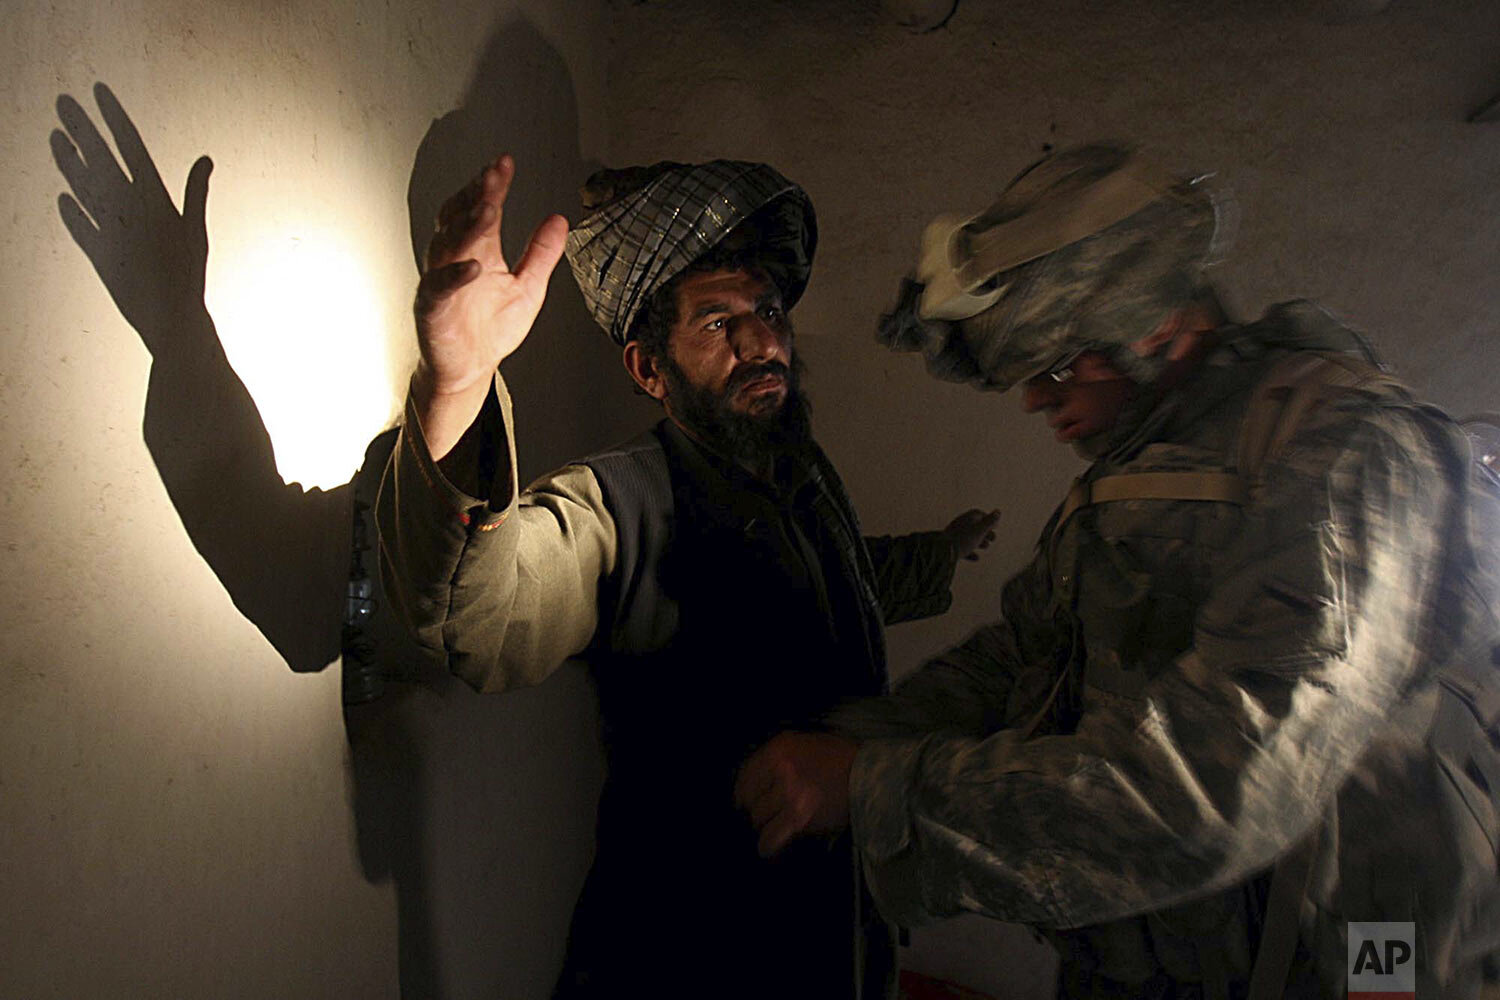  A U.S. soldier of B company, 4th Infantry Regiment frisks an afghan man in his house during a search operation in Sinan village in Zabul province, southeastern Afghanistan, Monday, April. 2, 2007. (AP Photo/Rafiq Maqbool) 